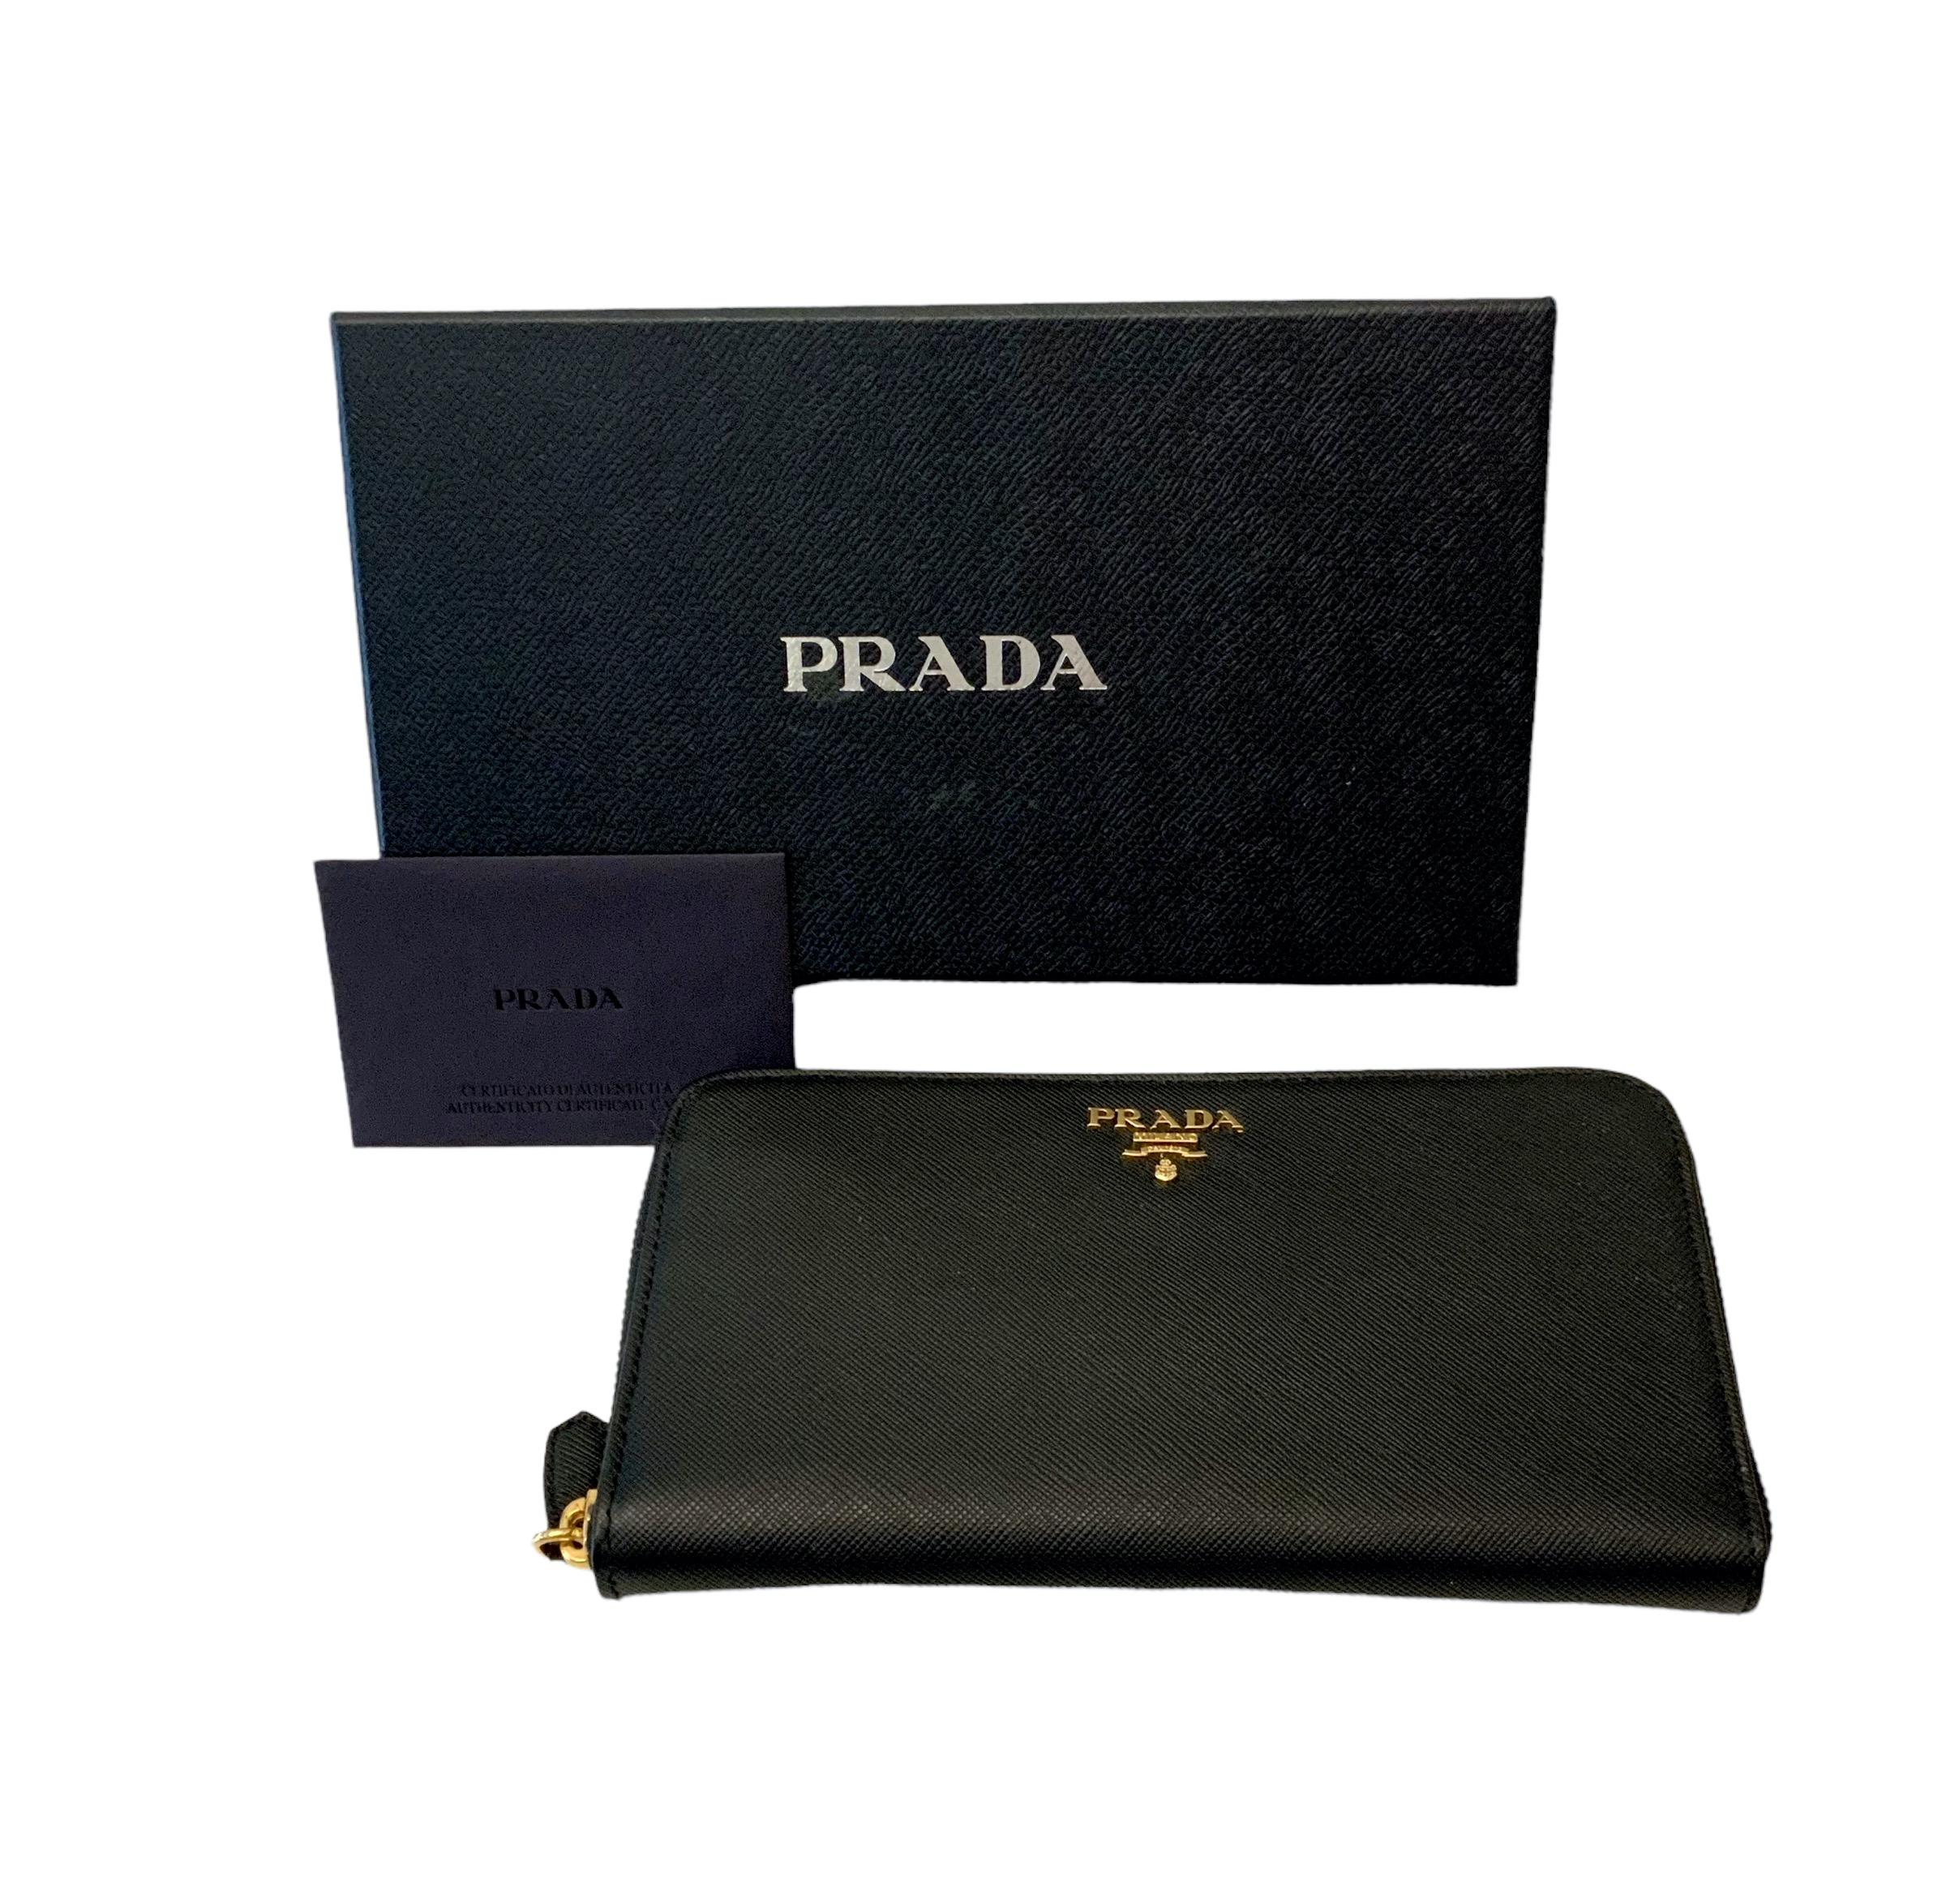 This pre-owned but new Saffiano leather wallet is decorated with gold-tone metal Prada lettering. 
It features an all-round zipper revealing 8x card slots, 2x flat pockets, 2x bill compartments and a zippered compartment for coins.

Material: